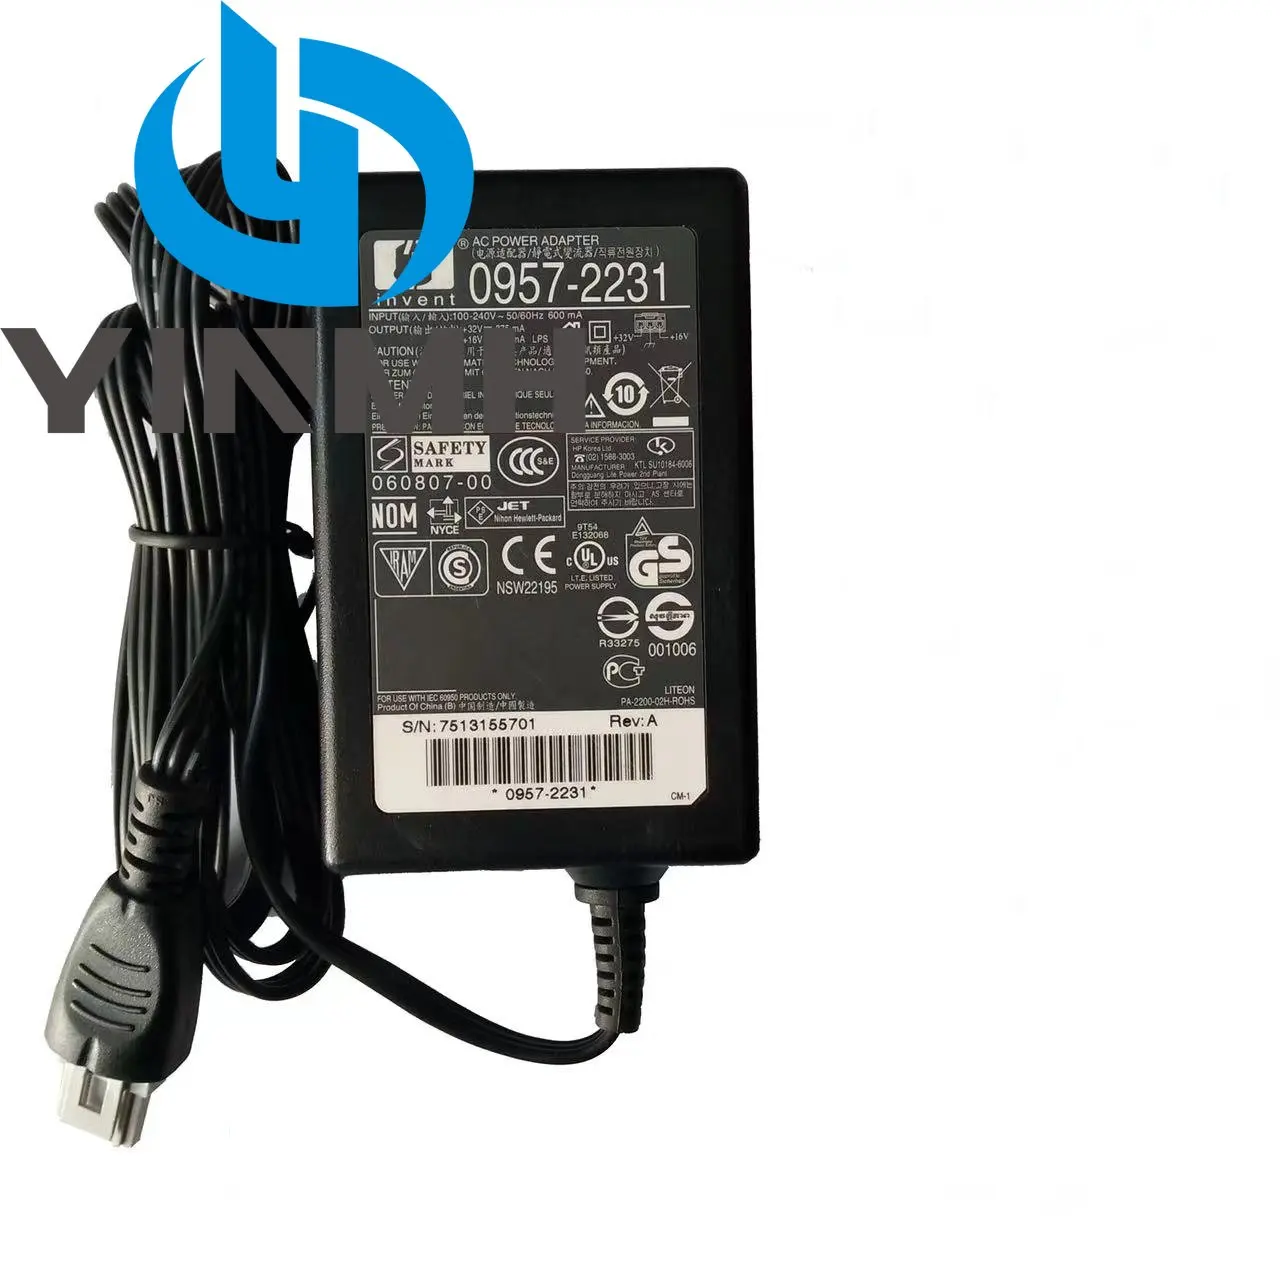 0957-2231 AC Adapter Charger Power Supply 32V 375mA 16V 500mA for HP D1420 D1430 D1460 D2430 D2460 F2120 F2140 F2240 F2280 _ - AliExpress Mobile